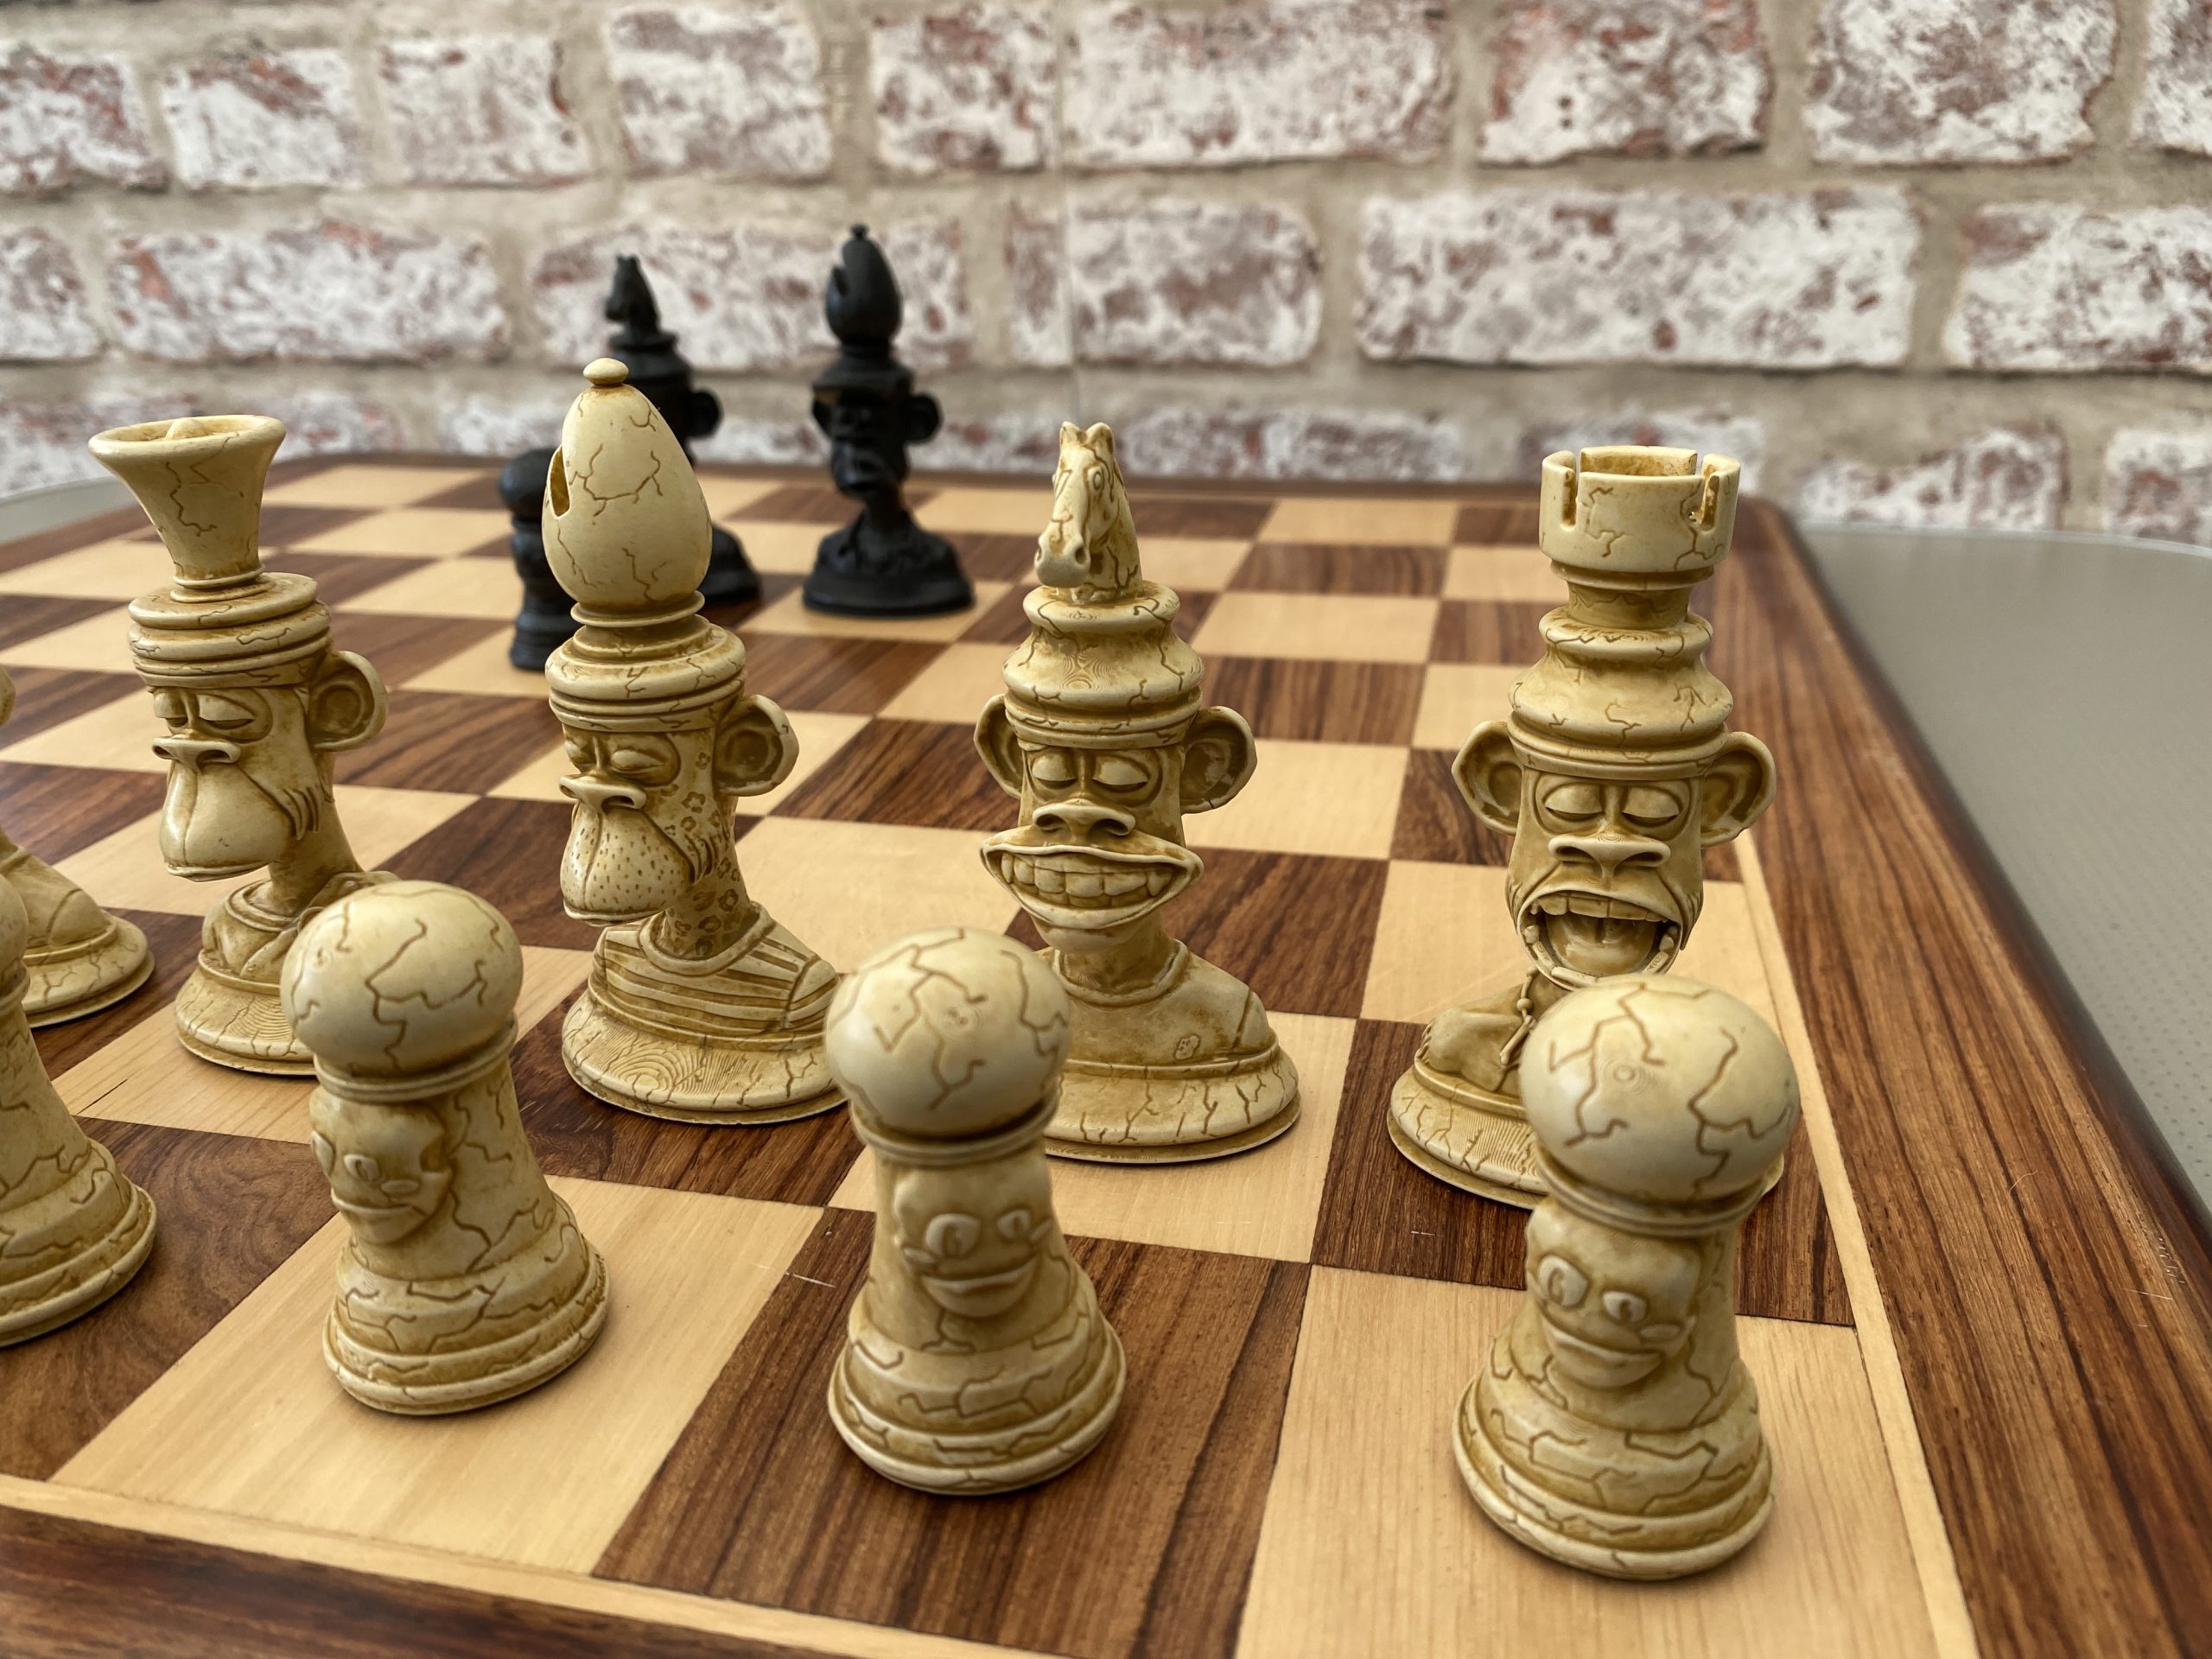 ARNO - 4.75 Chess Set with Black and White Board